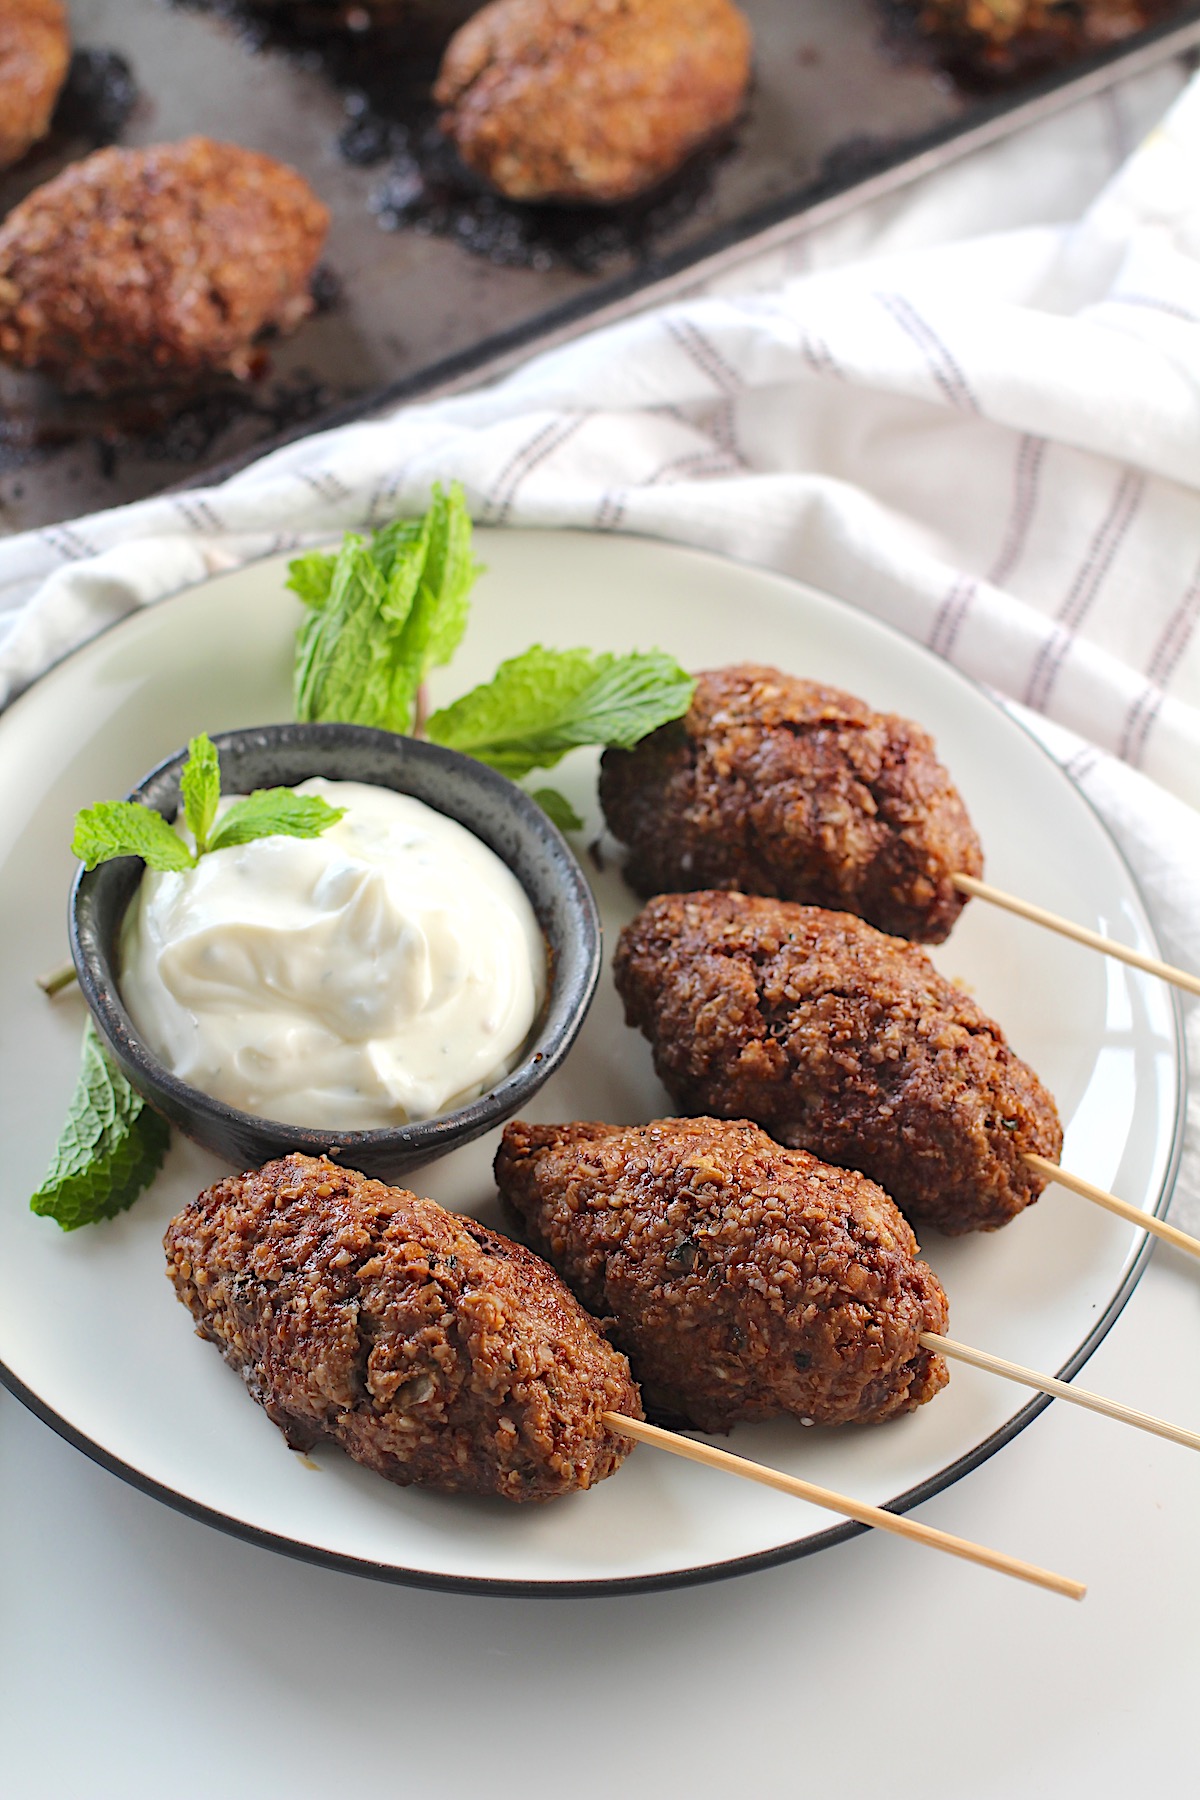 Four Kibe kabobs, Mediterranean Ground Beef Kabob recipe, cooked, skewered, and plated with yogurt dipping sauce and fresh mint leaves as garnish.